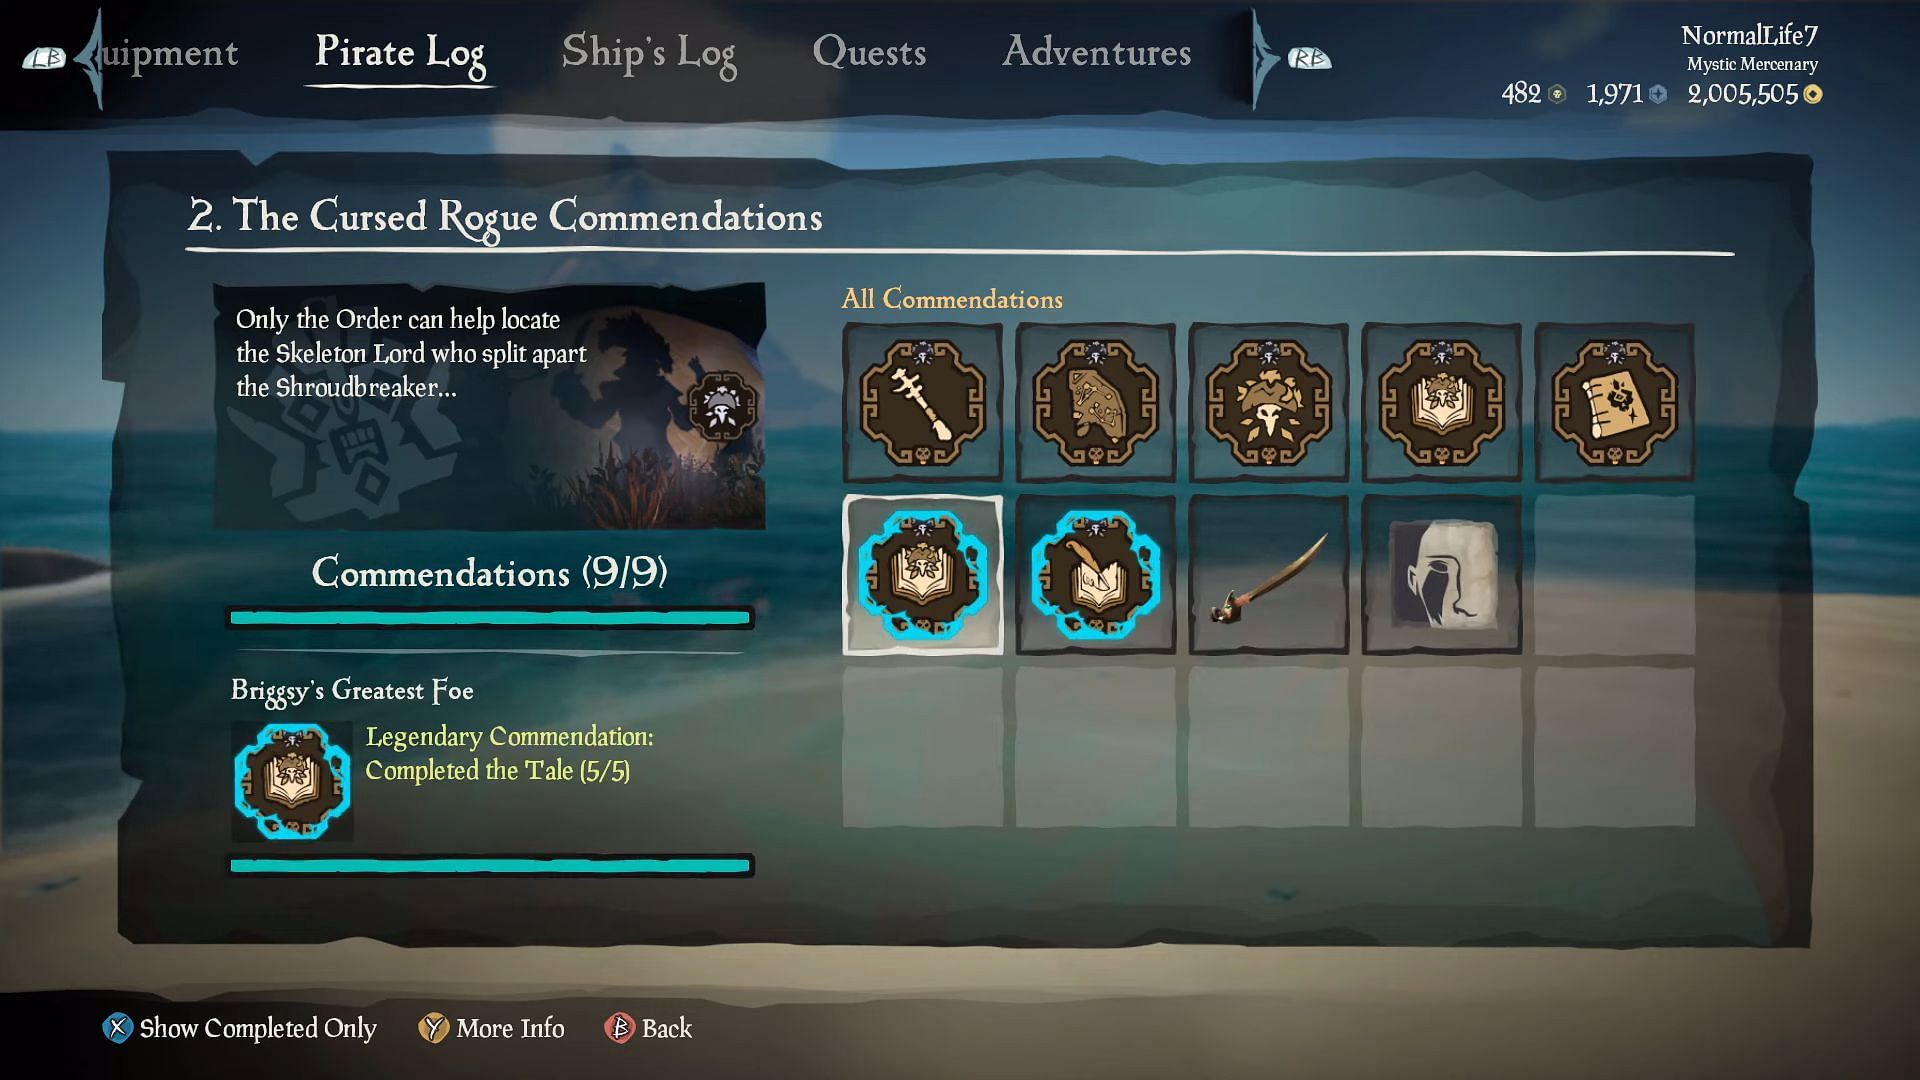 Bruggsy&#039;s Greatest Foe commendation unlocked (Image via Rare/ Normal Life Gaming on YouTube)